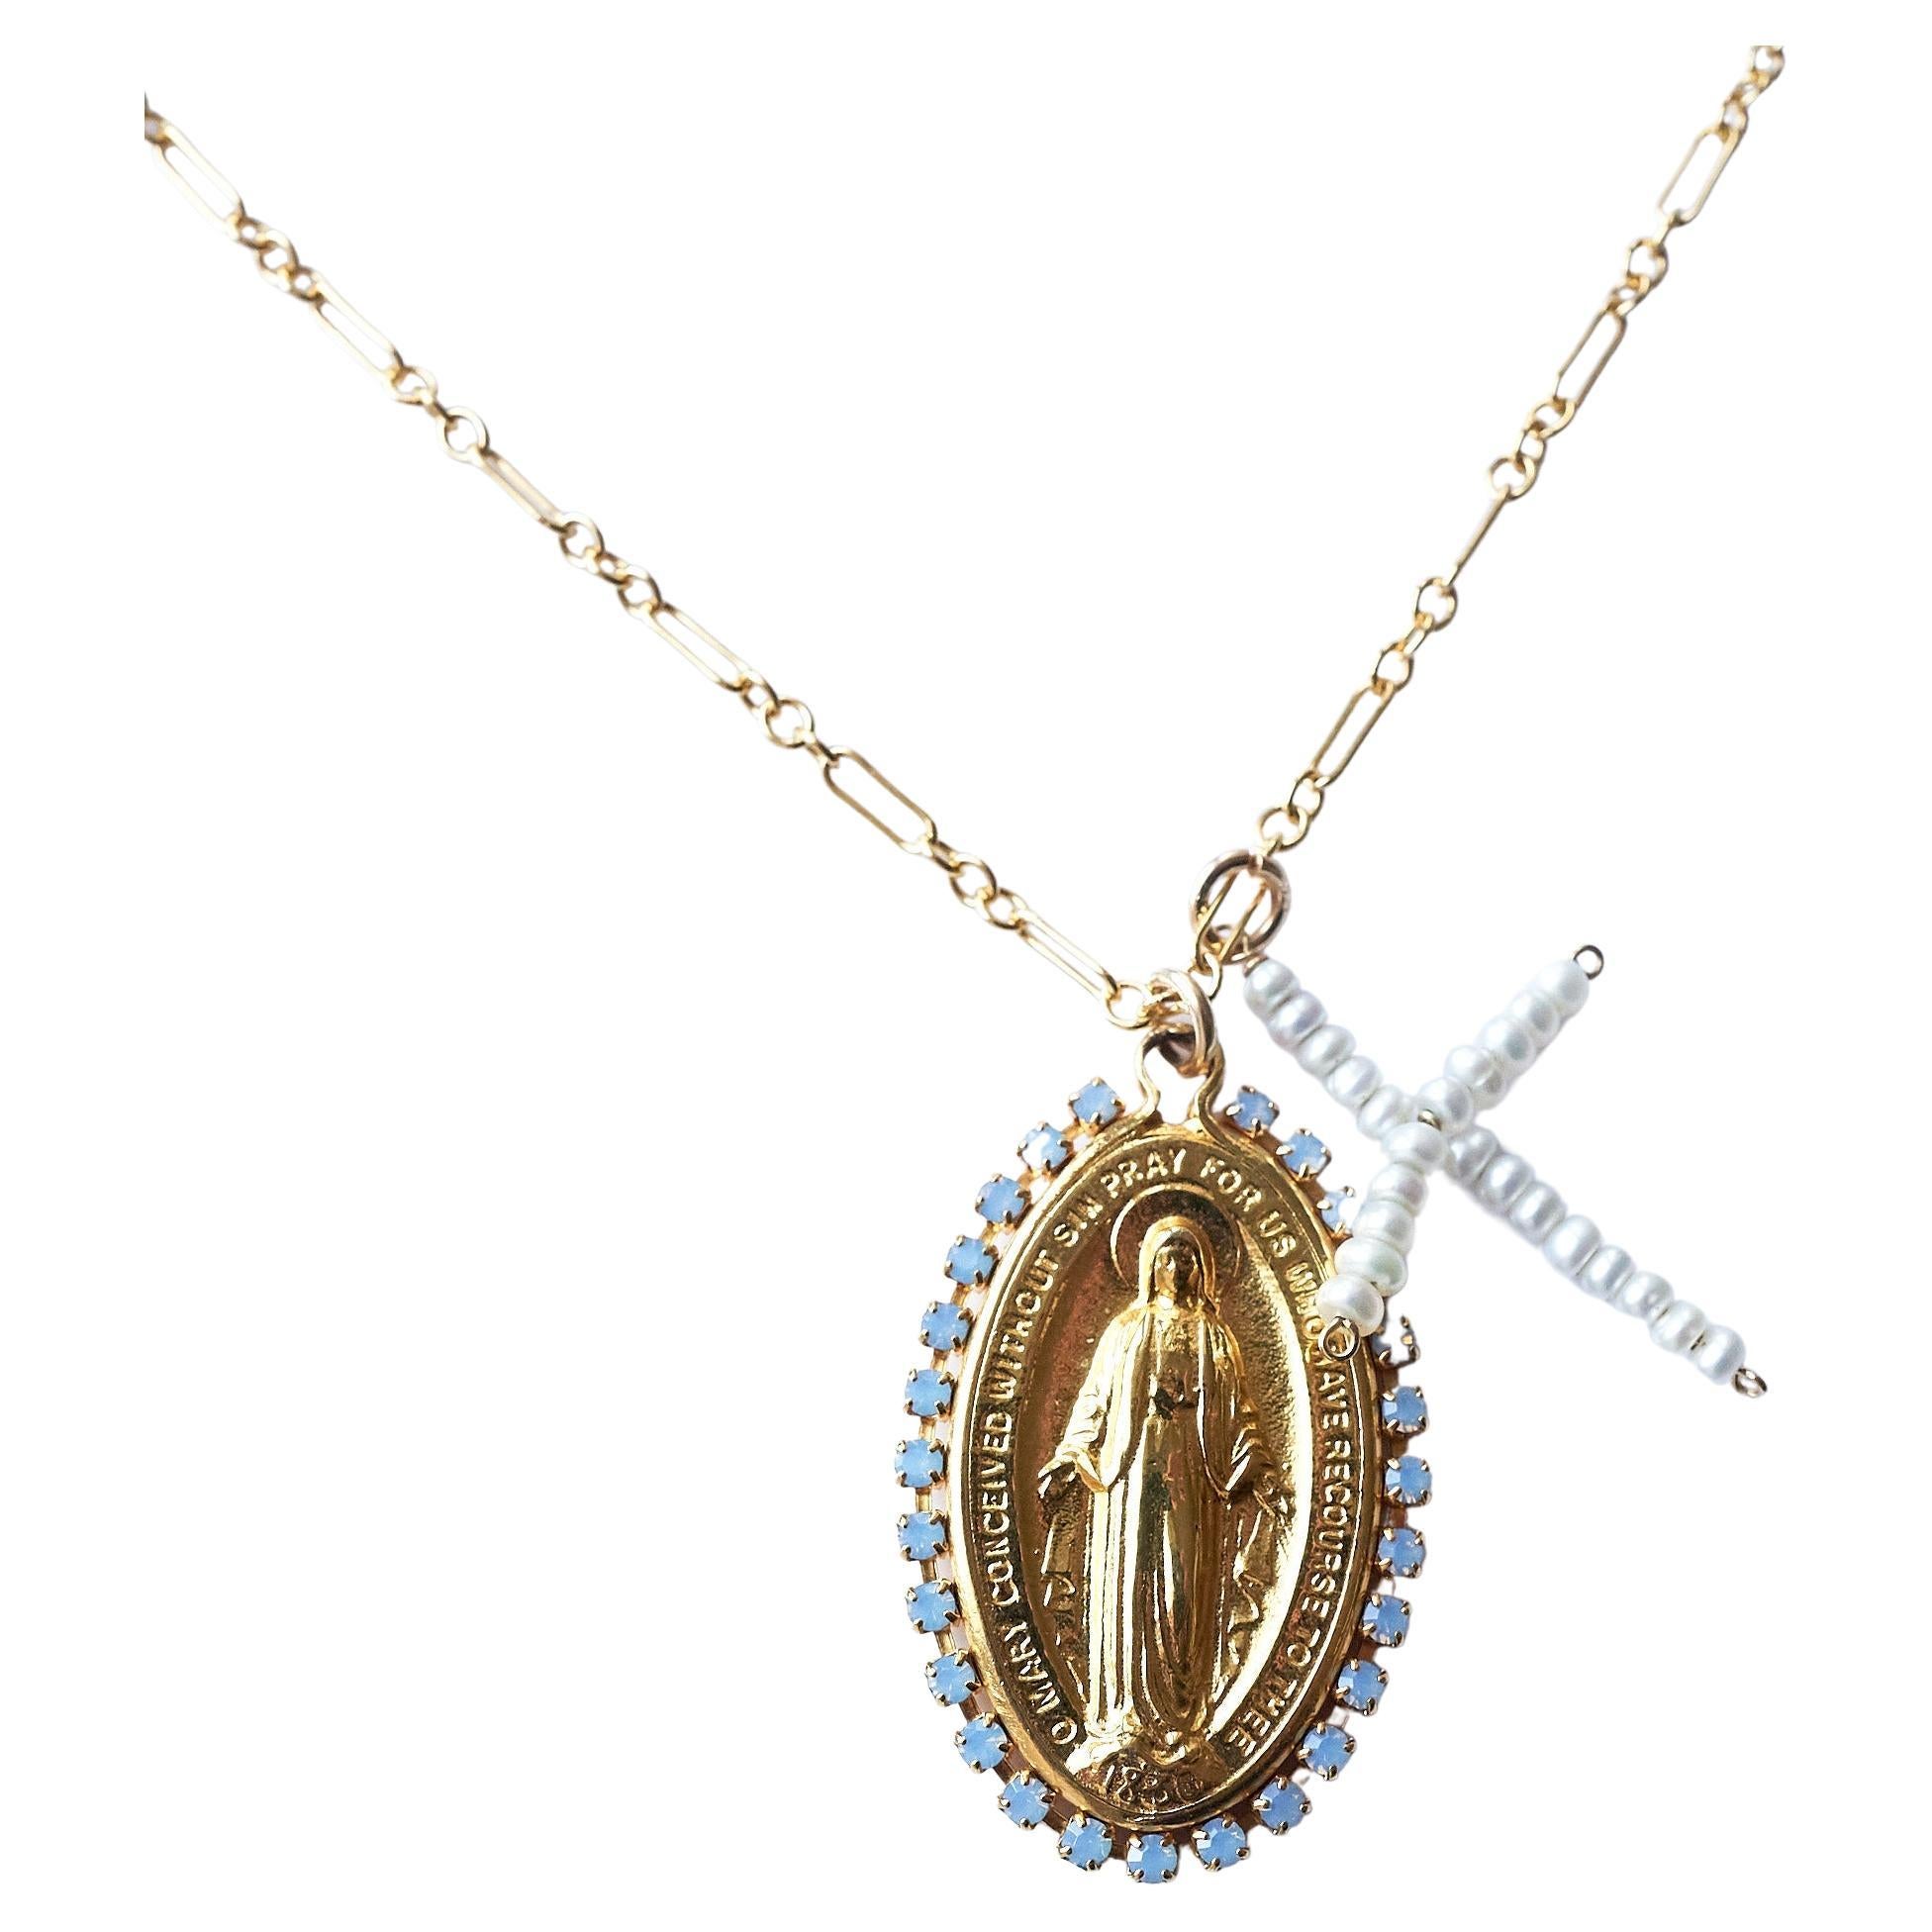 Virgin Mary Oval Medal White Pearl Cross Chain Necklace Light Blue Rhinestone 28